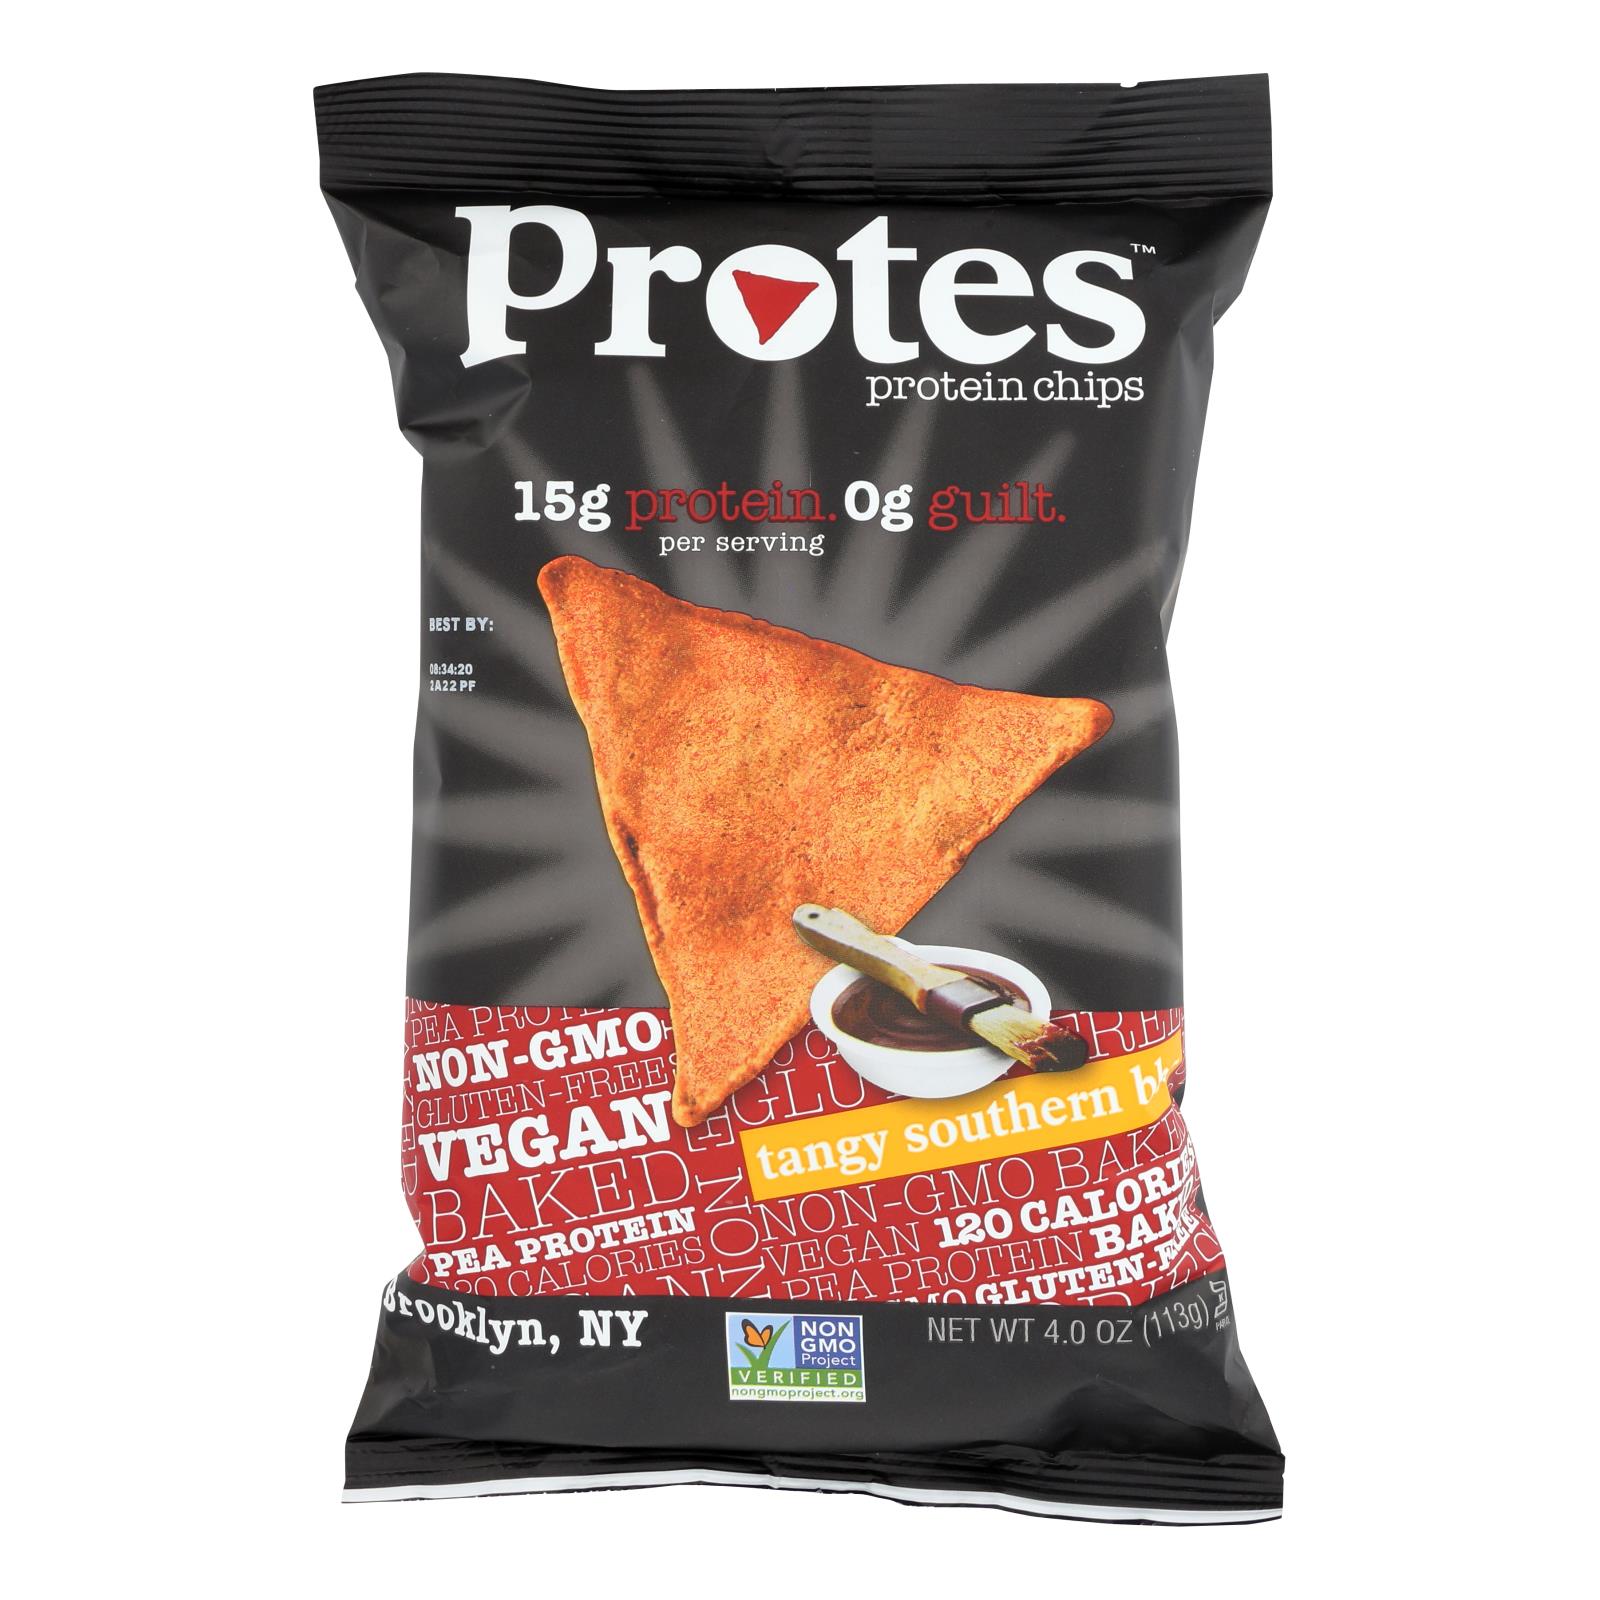 Protes Protein Chips - Chip Protein Tngy Sthrn BBQ - Case of 12 - 4 OZ